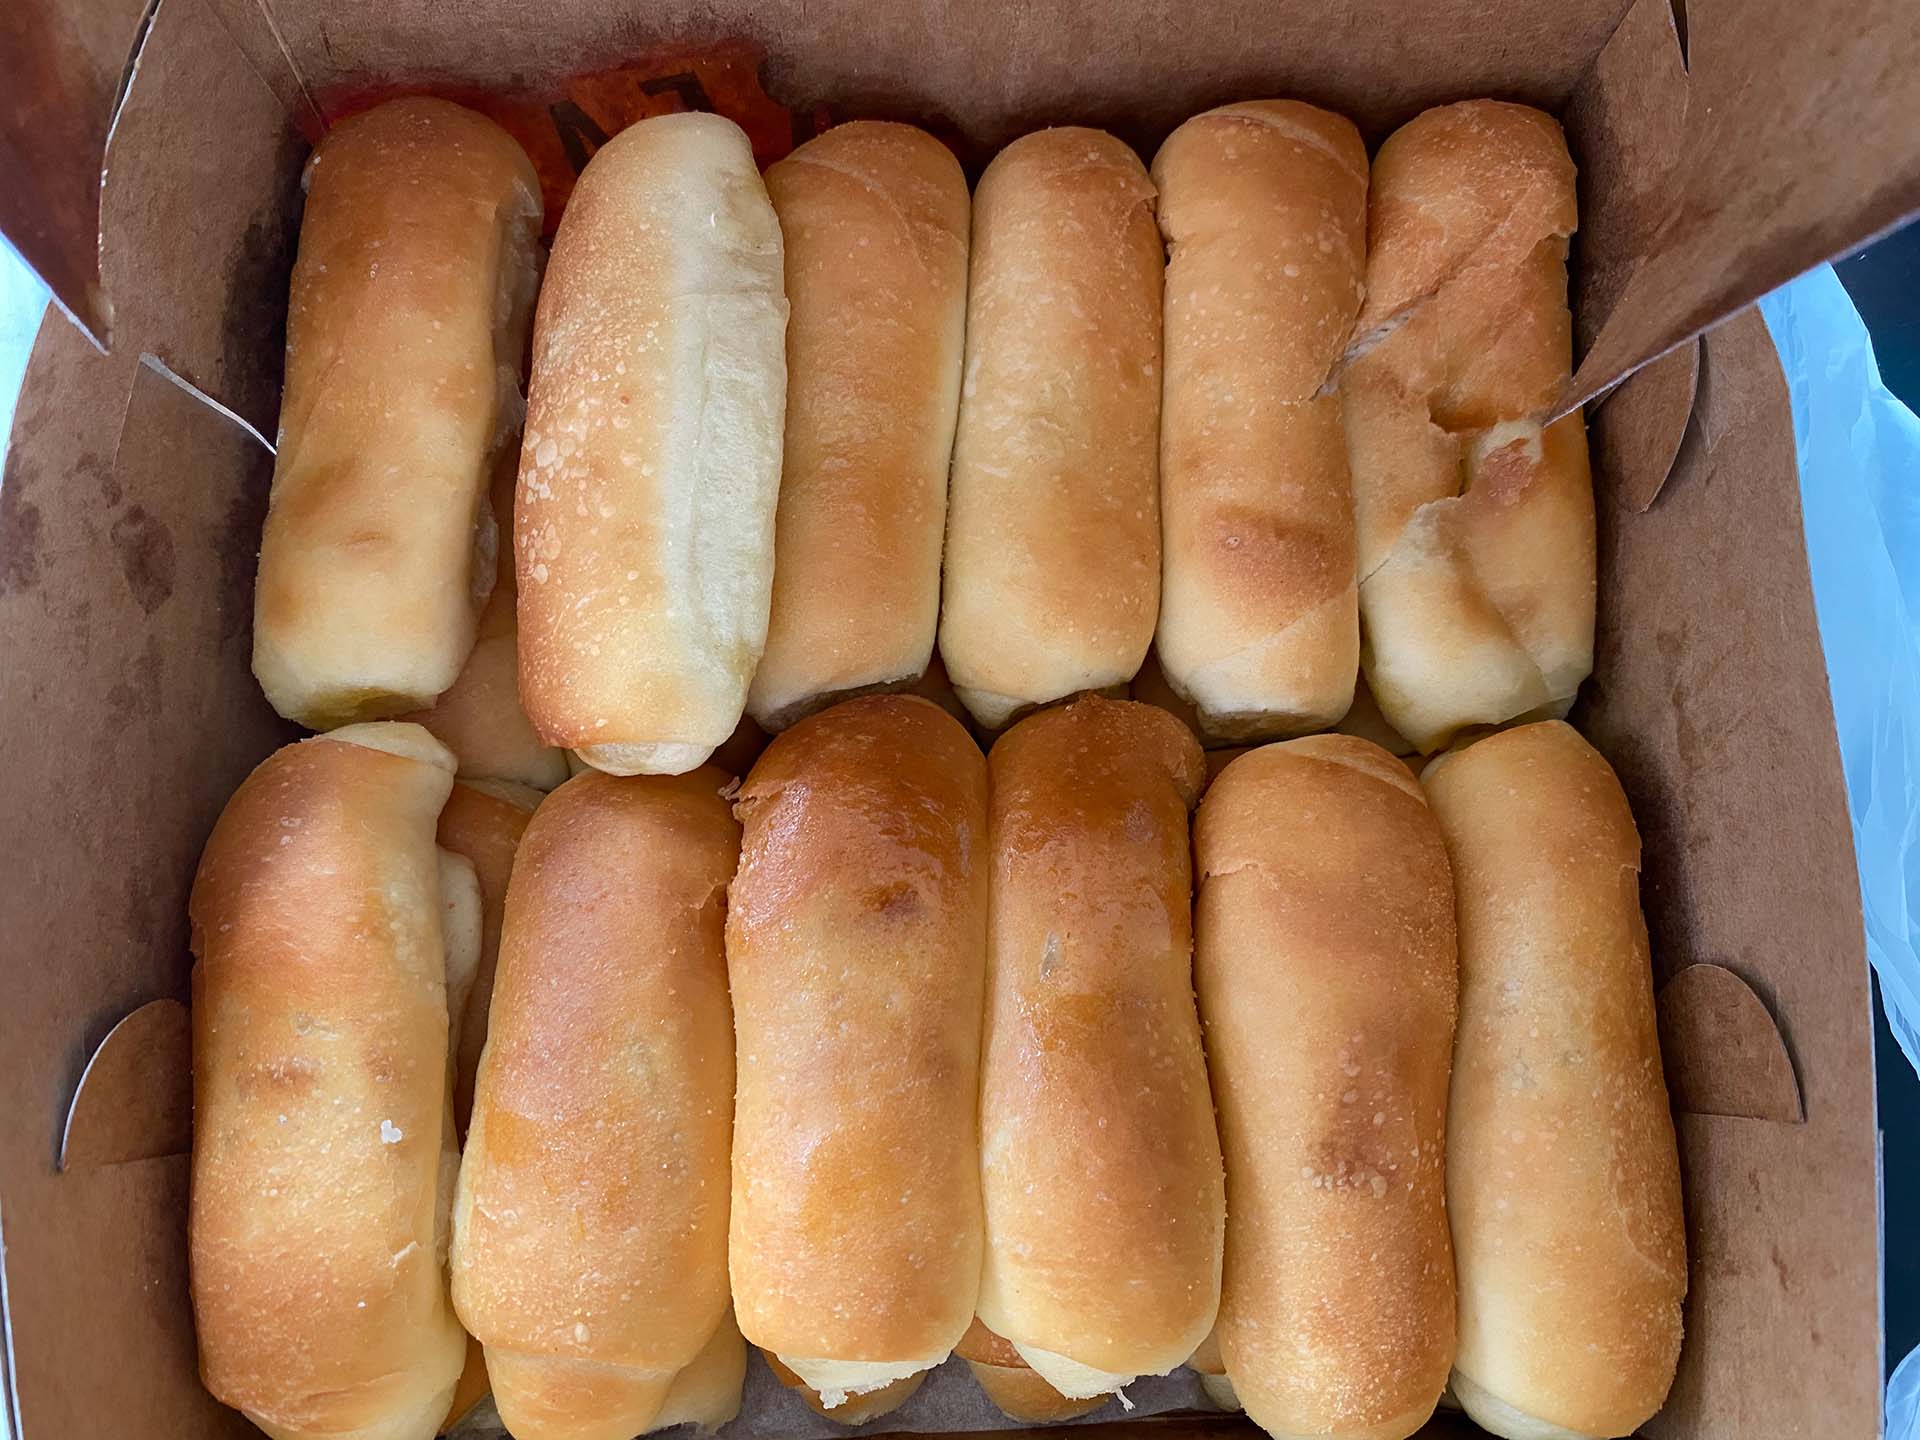 A box of señorita bread — more than 20 golden-brown rolls stacked inside.